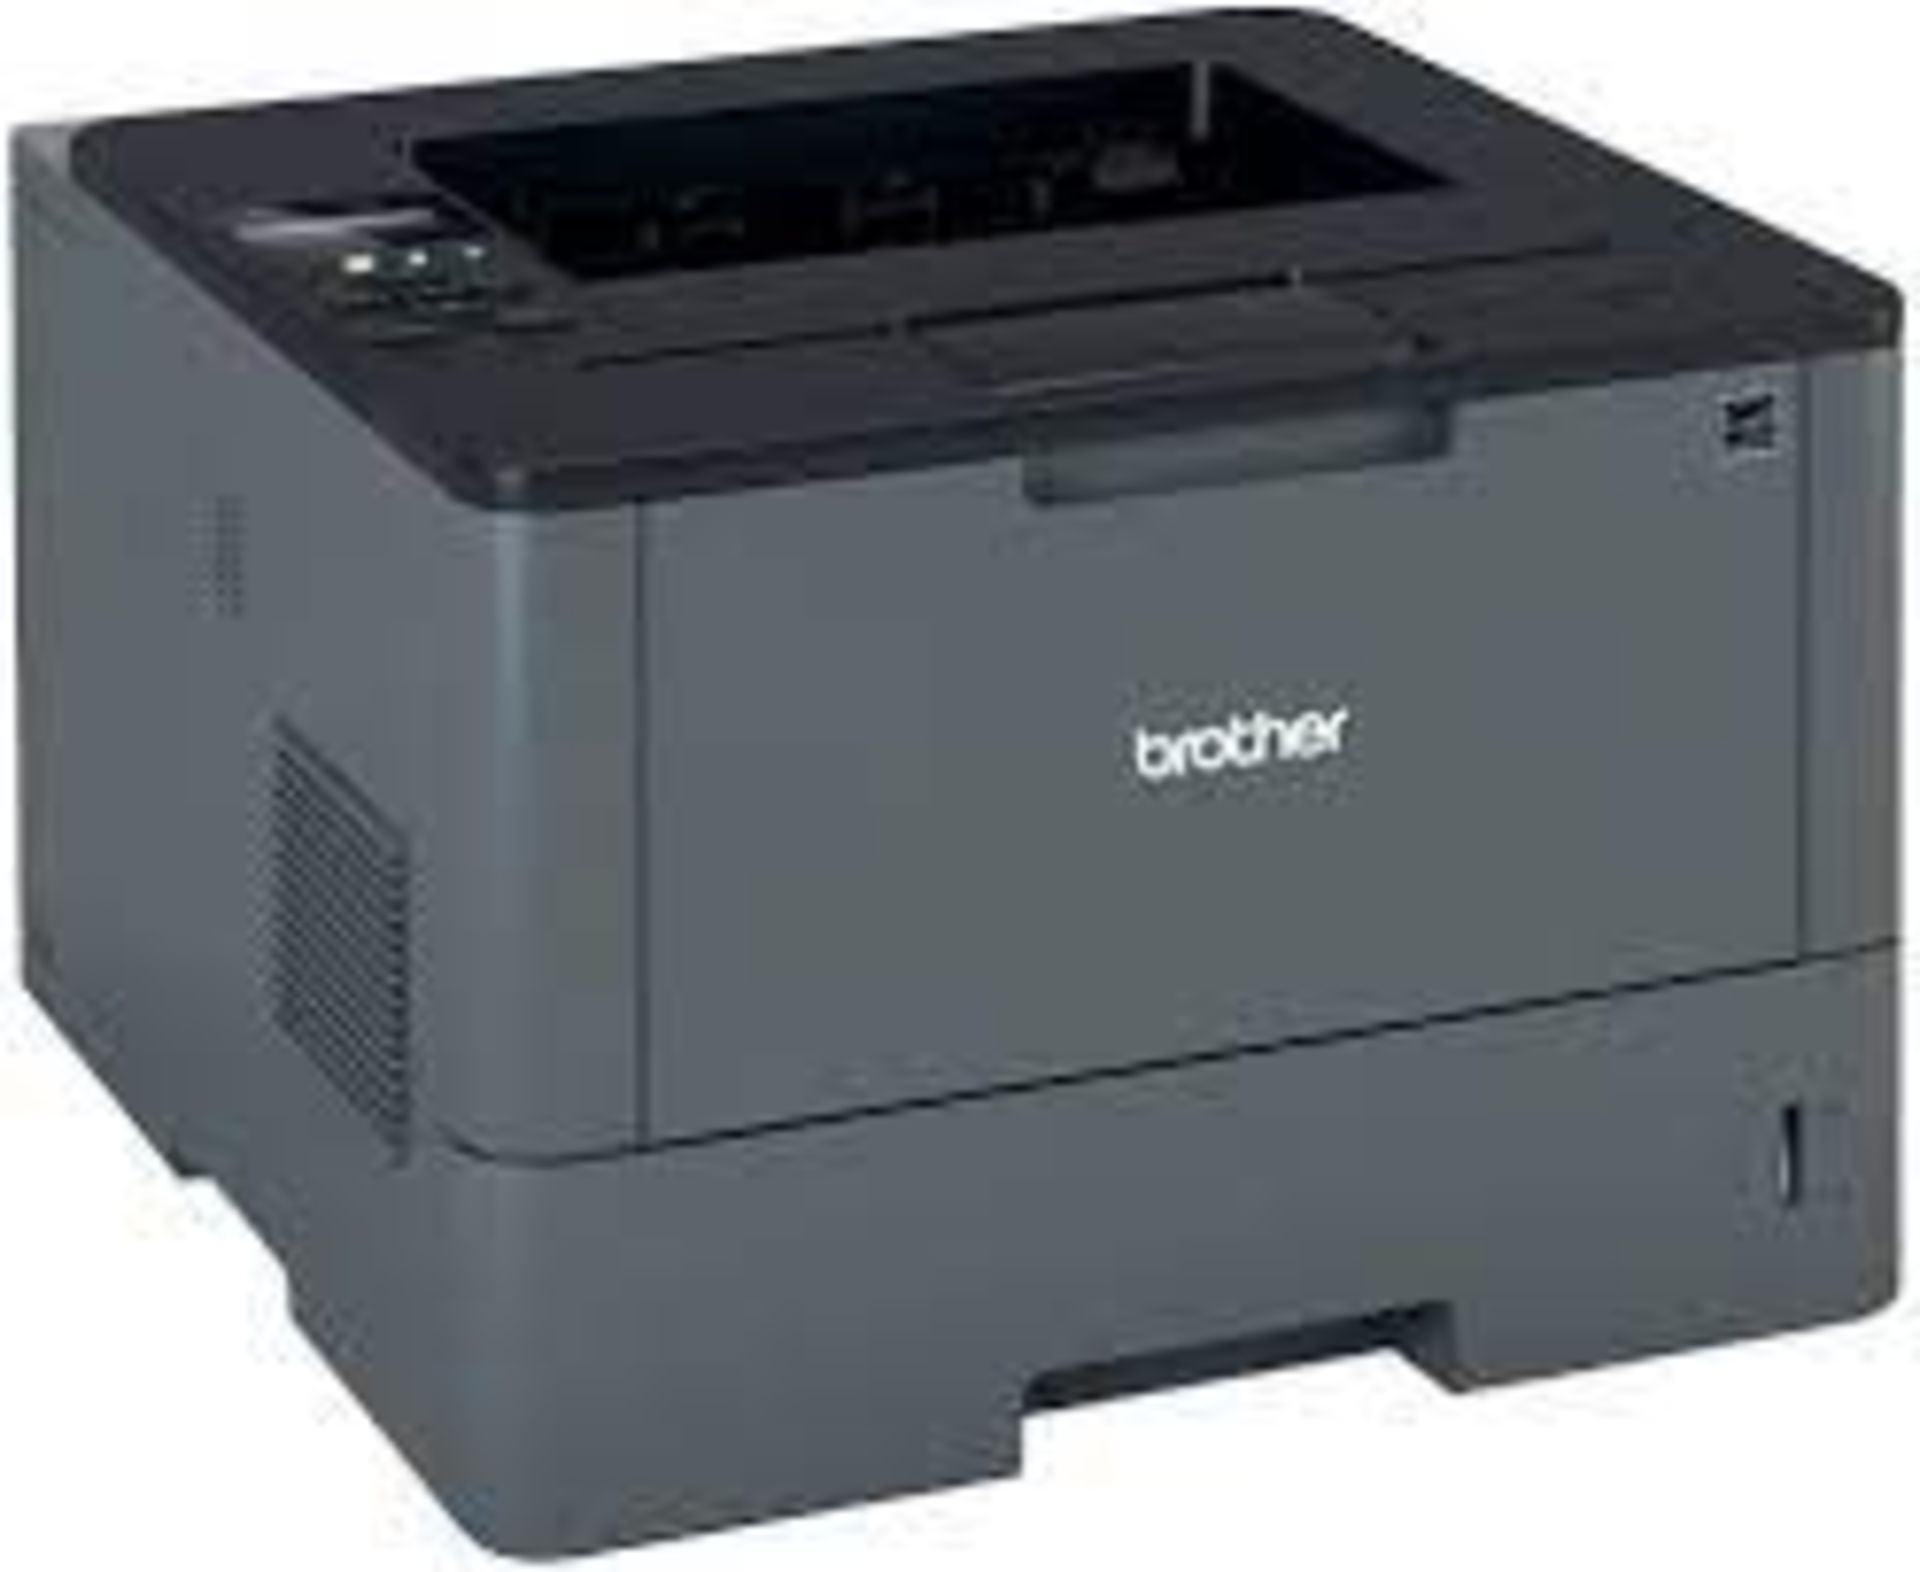 BRAND NEW BROTHER MONO MFC-L5750DW GREY MULTIFUNCTION LASER PRINTER RRP £499 R16-9